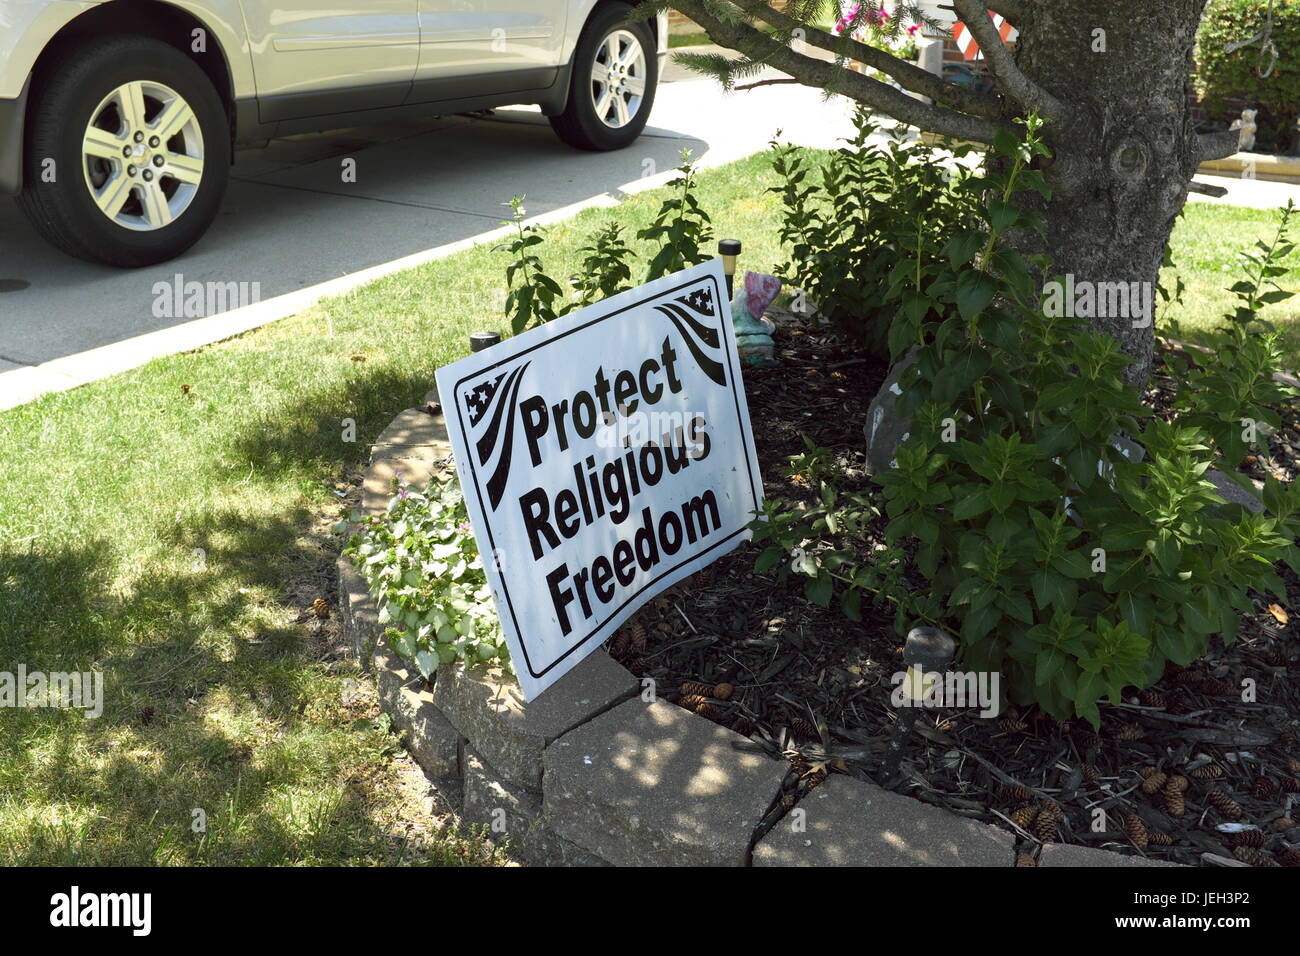 A 'Protect Religious Freedom' sign placed in the front yard of a home in the suburbs of Cleveland, Ohio, USA. Stock Photo